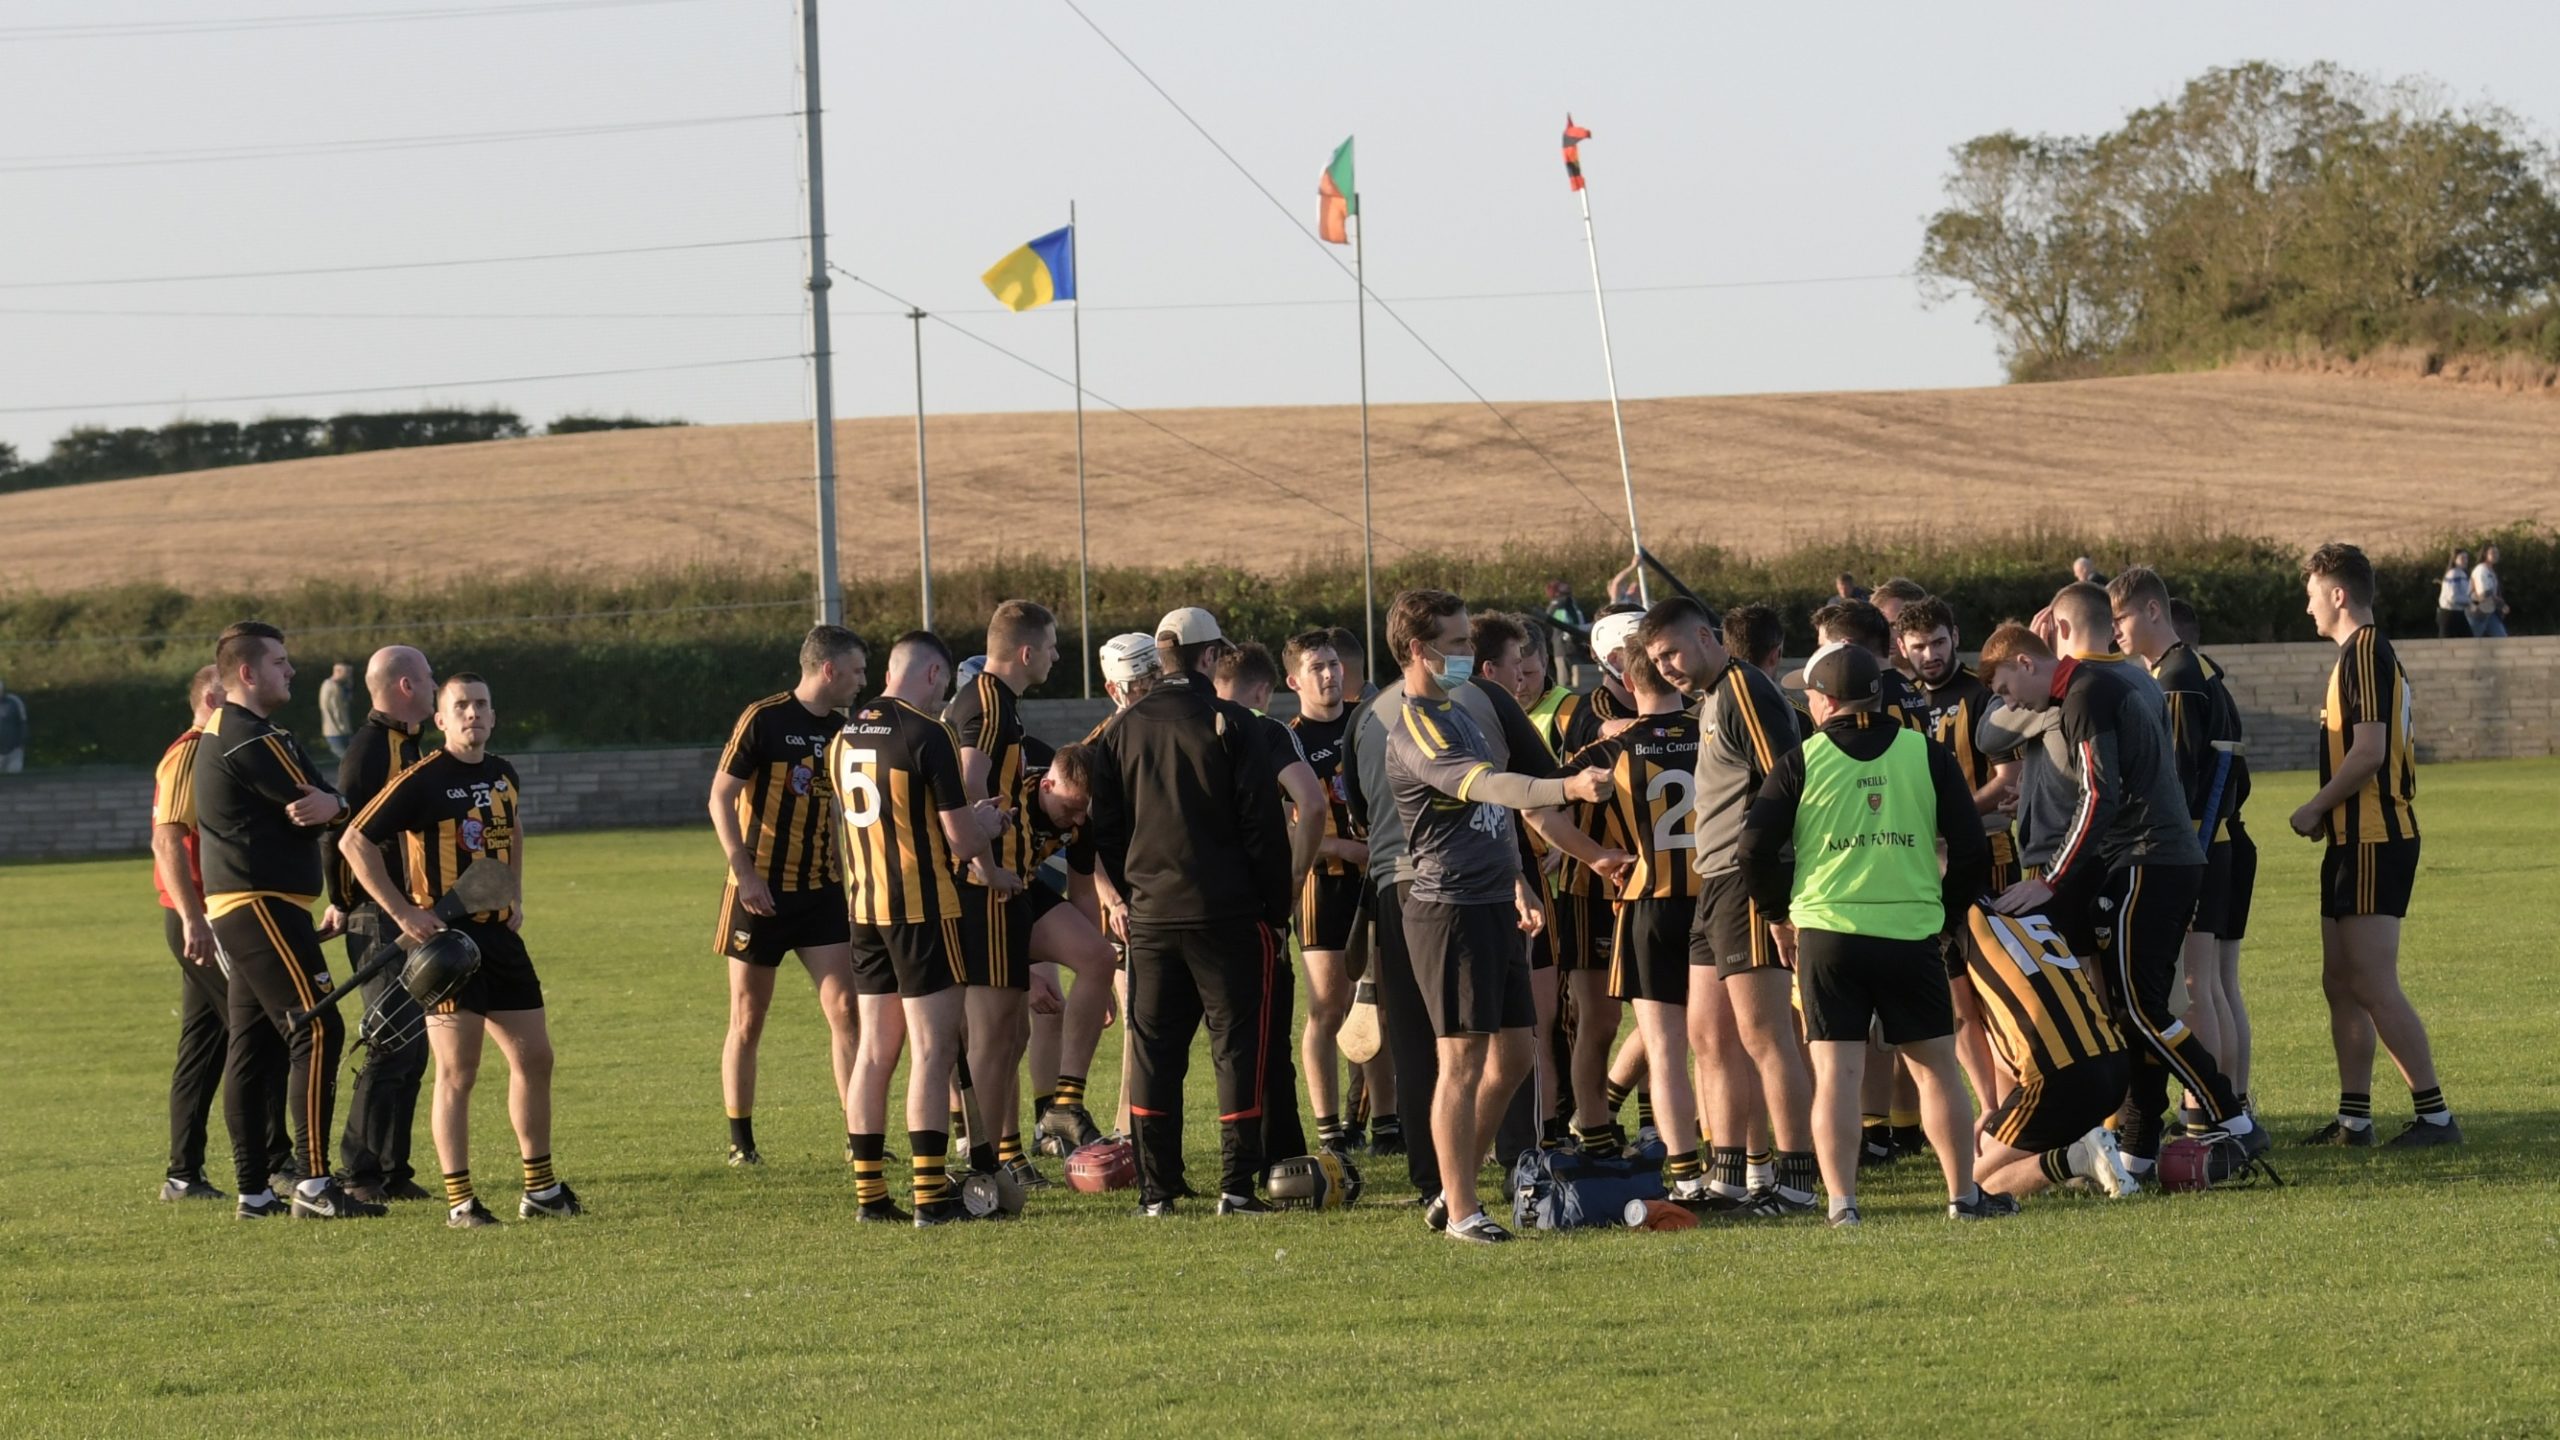 Down GAA SHC with Portaferry ends in a dramatic draw